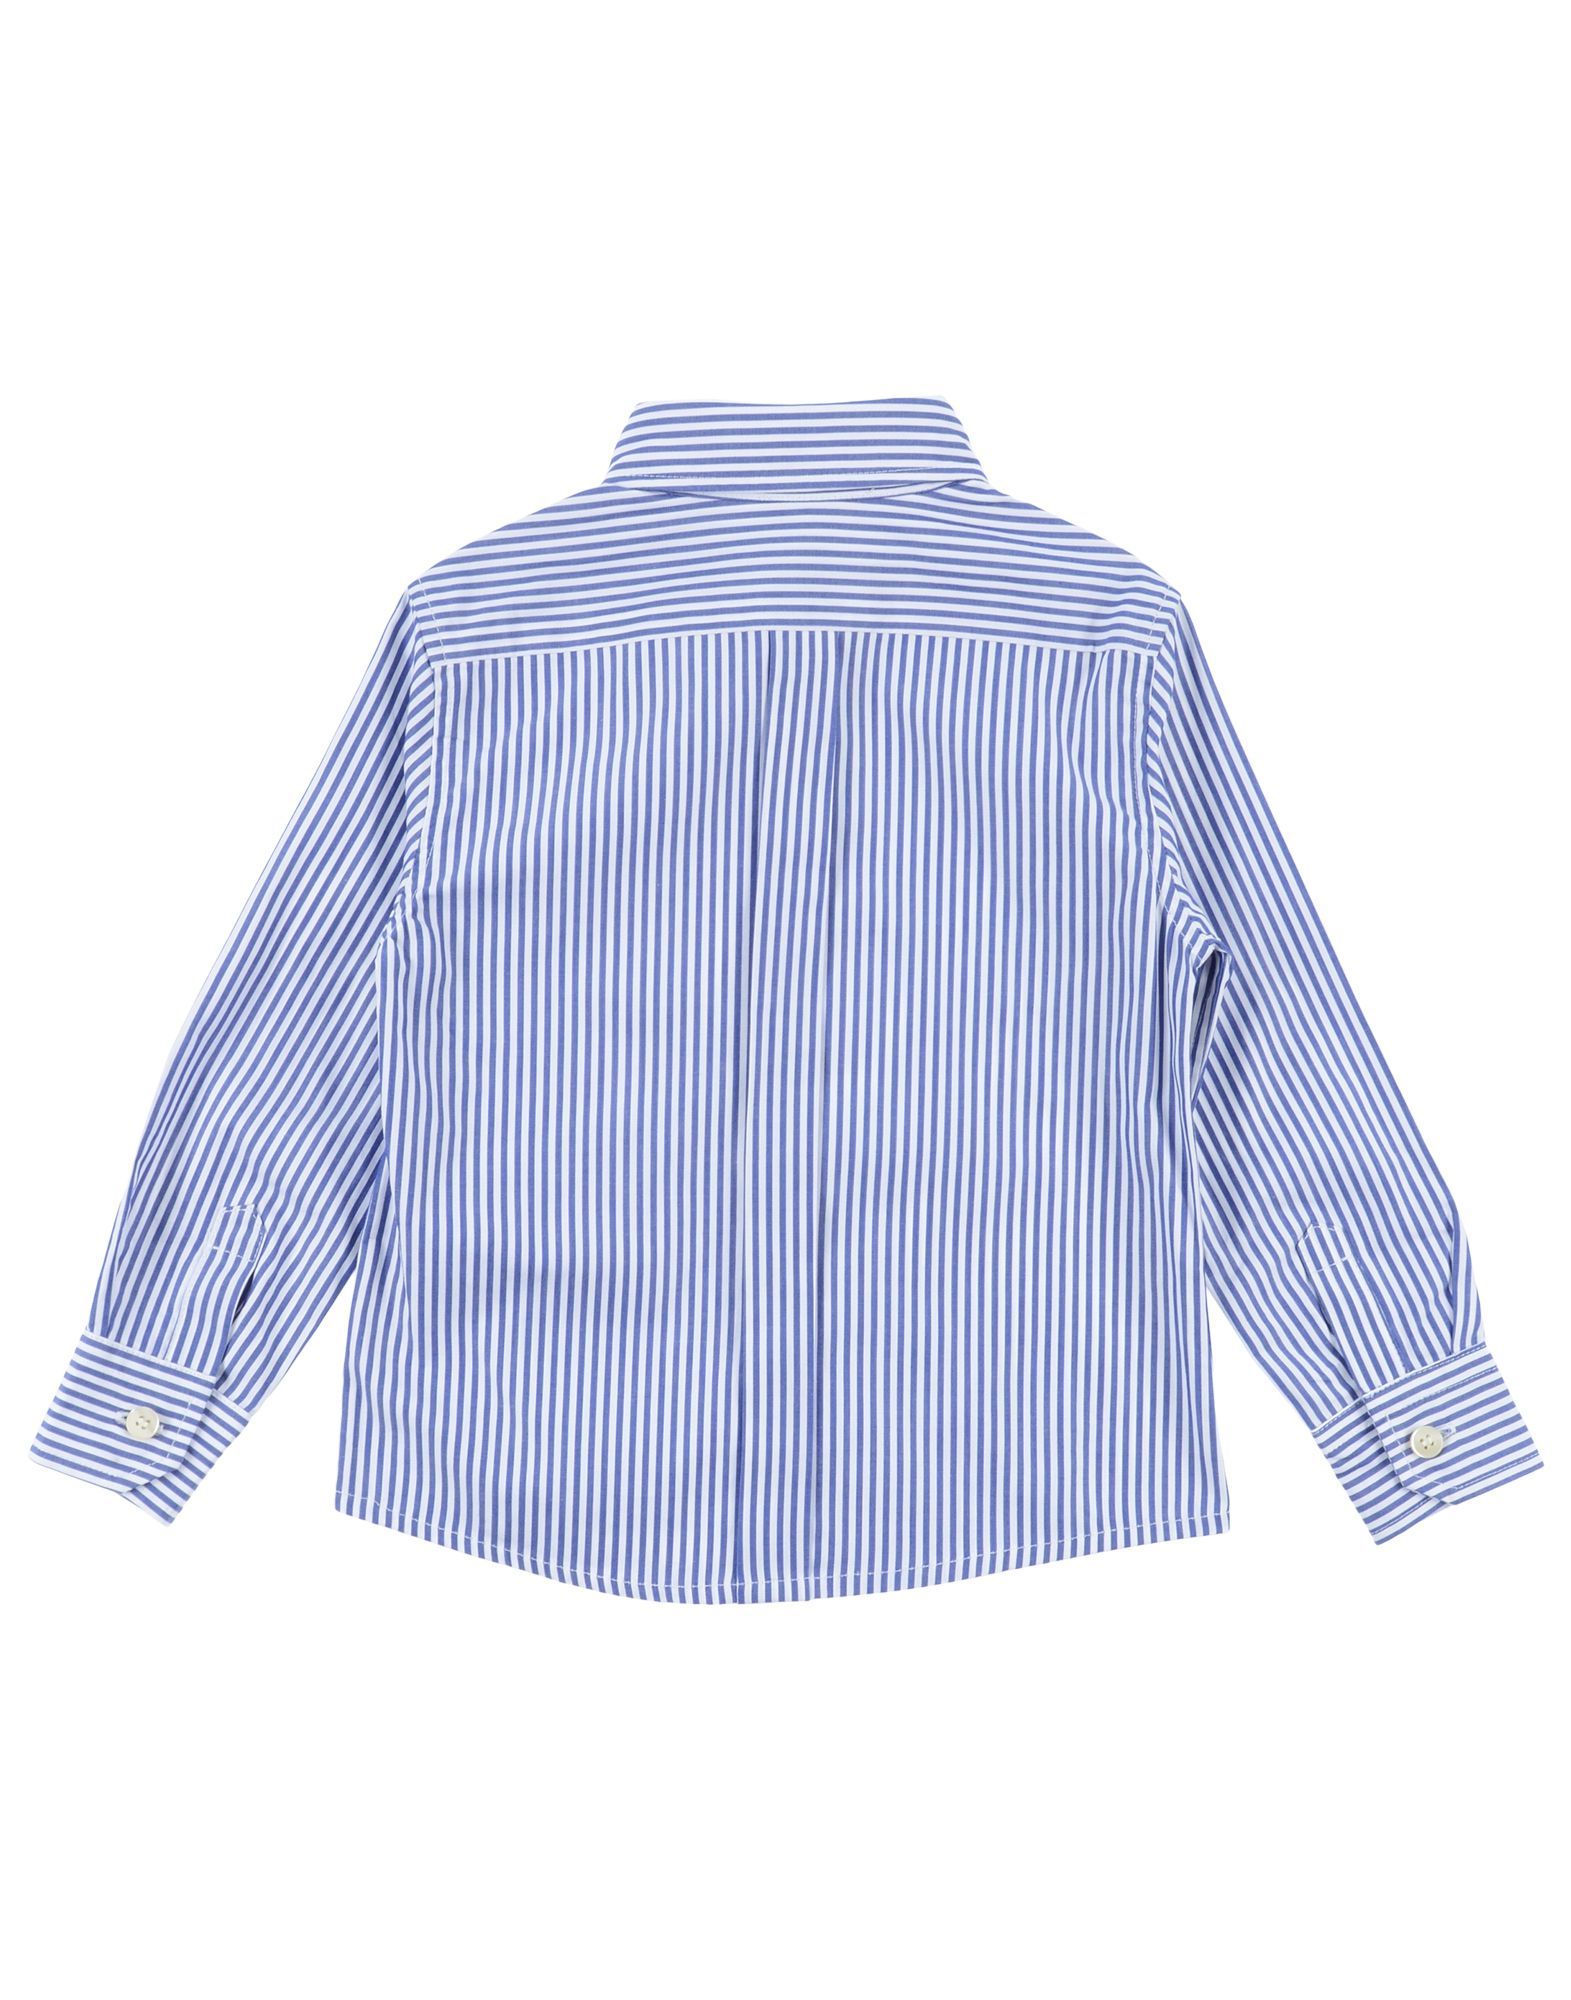 plain weave, no appliqués, stripes, rear closure, button closing, long sleeves, buttoned cuffs, classic neckline, no pockets, wash at 30° c, dry cleanable, iron at 110° c max, do not bleach, do not tumble dry